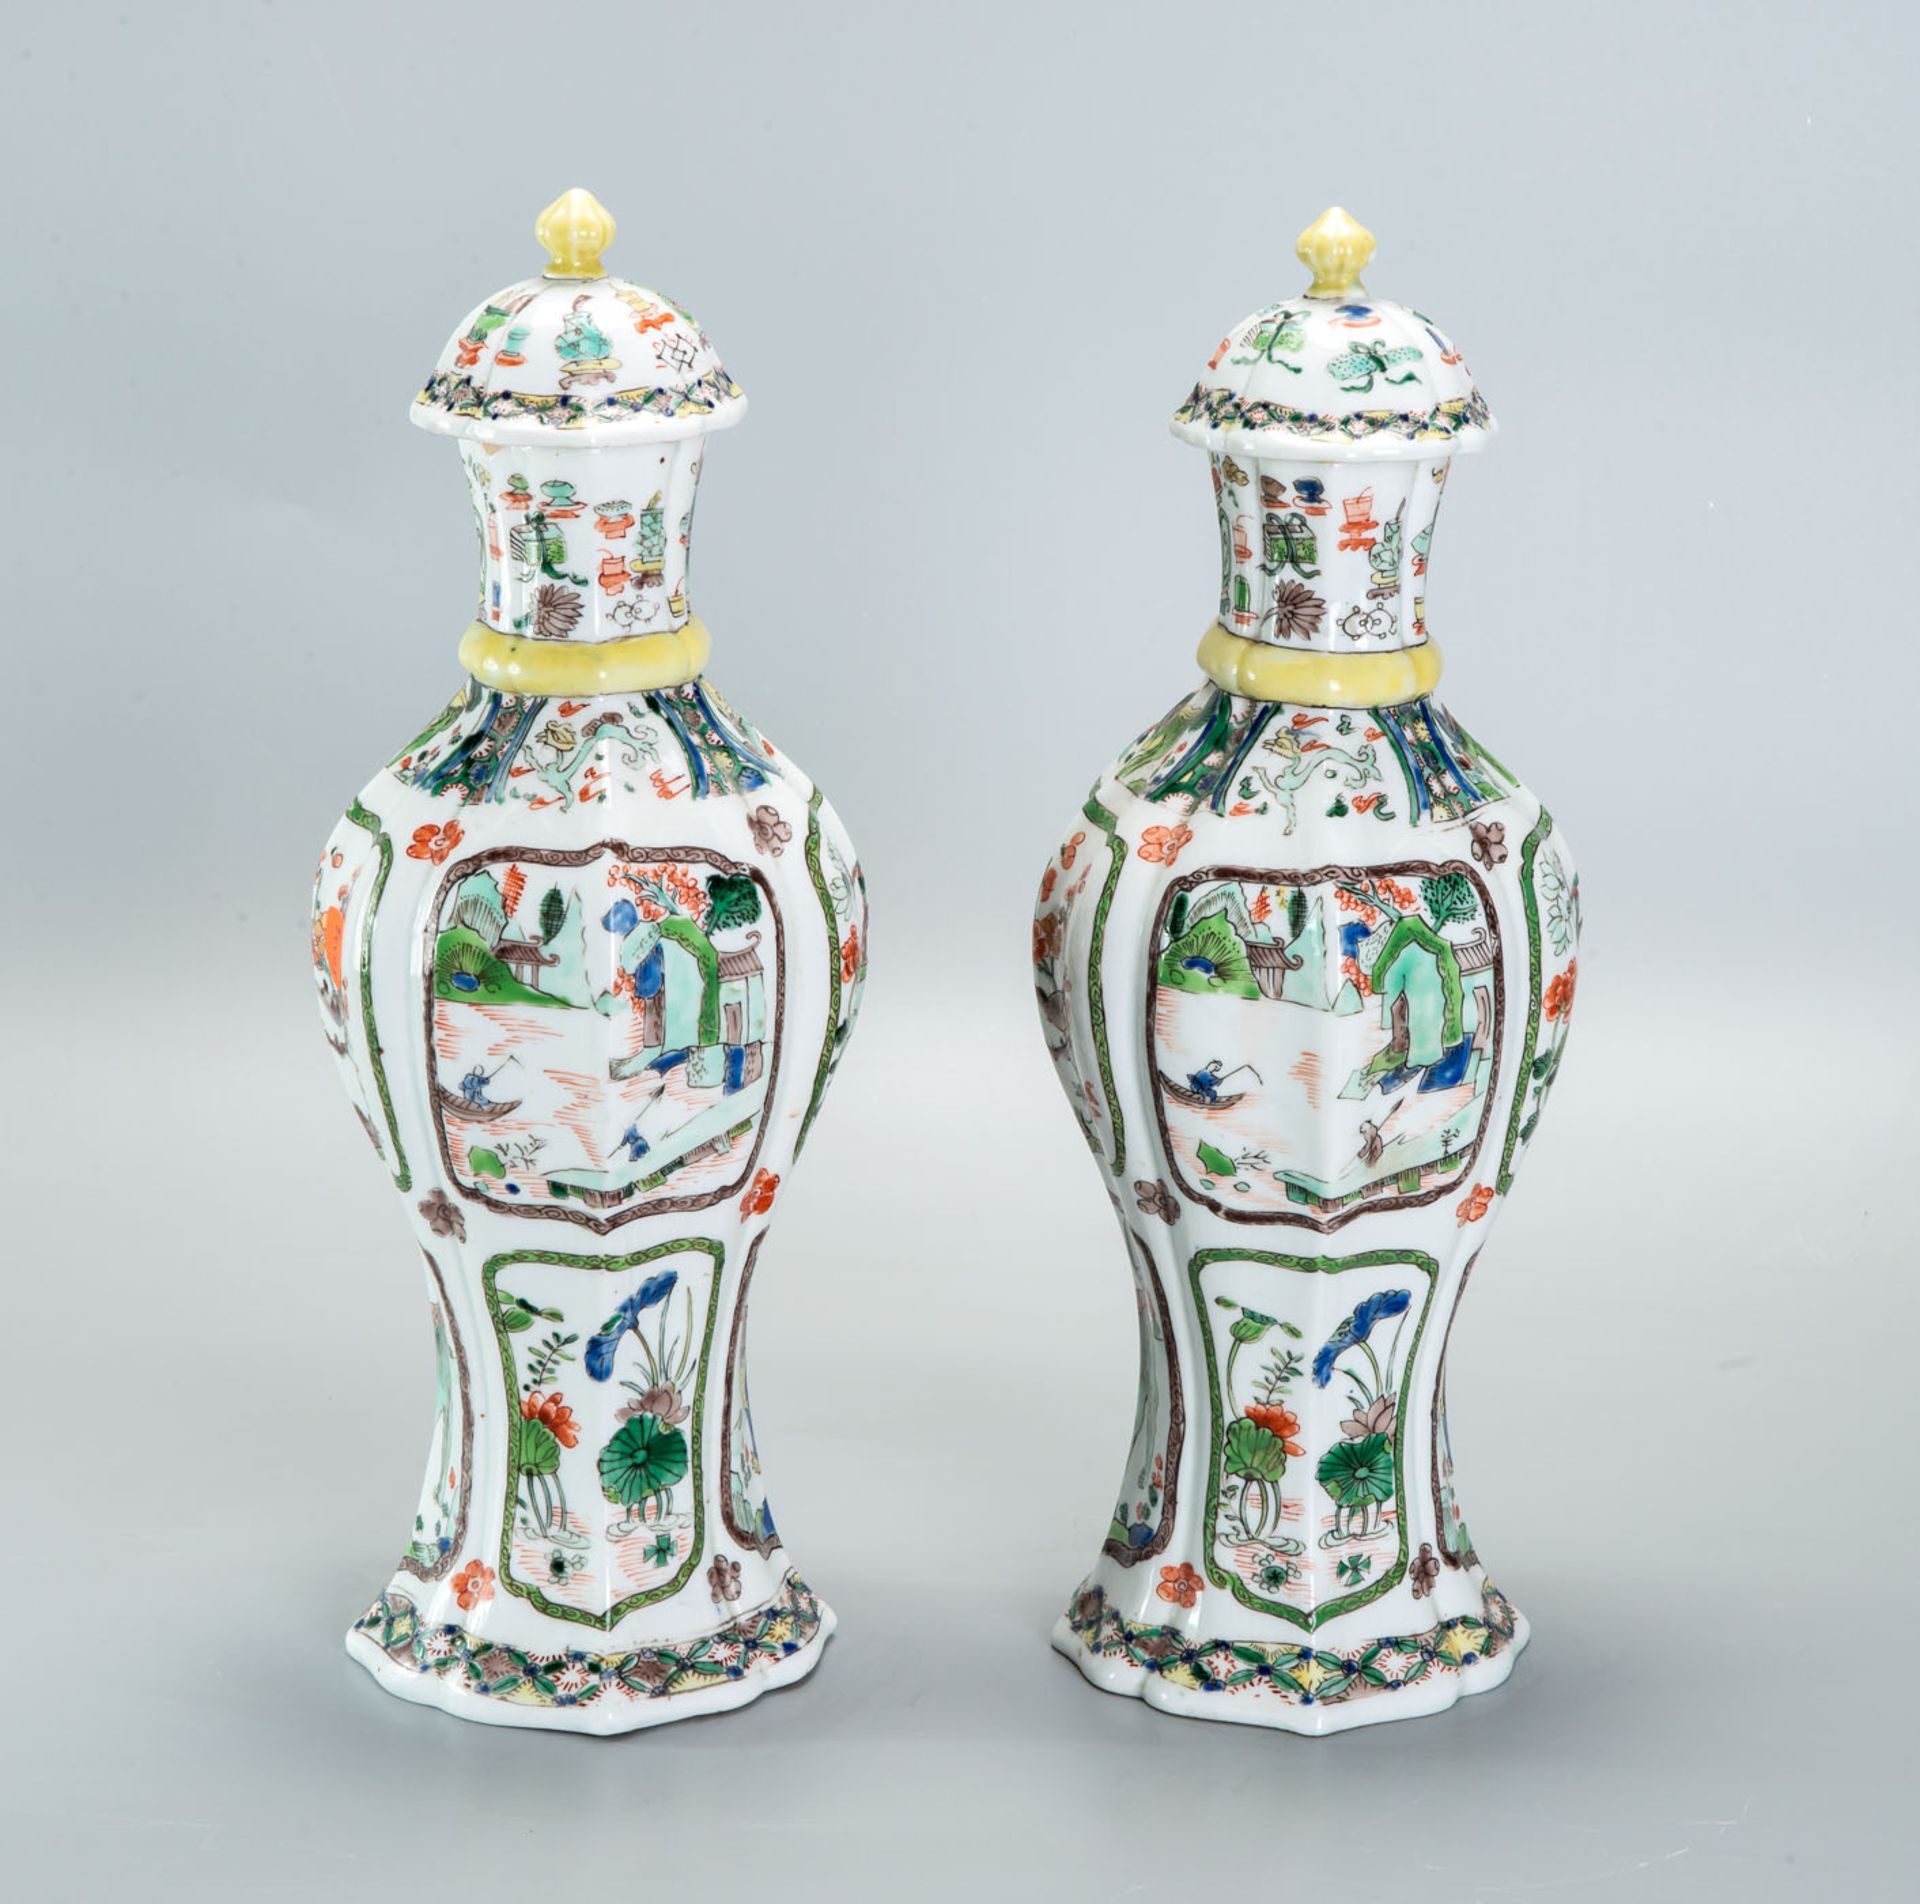 A Pair of Wucai Stoneware Lidded Vases, China, Qing Dynasty, 18th Century - Image 4 of 6